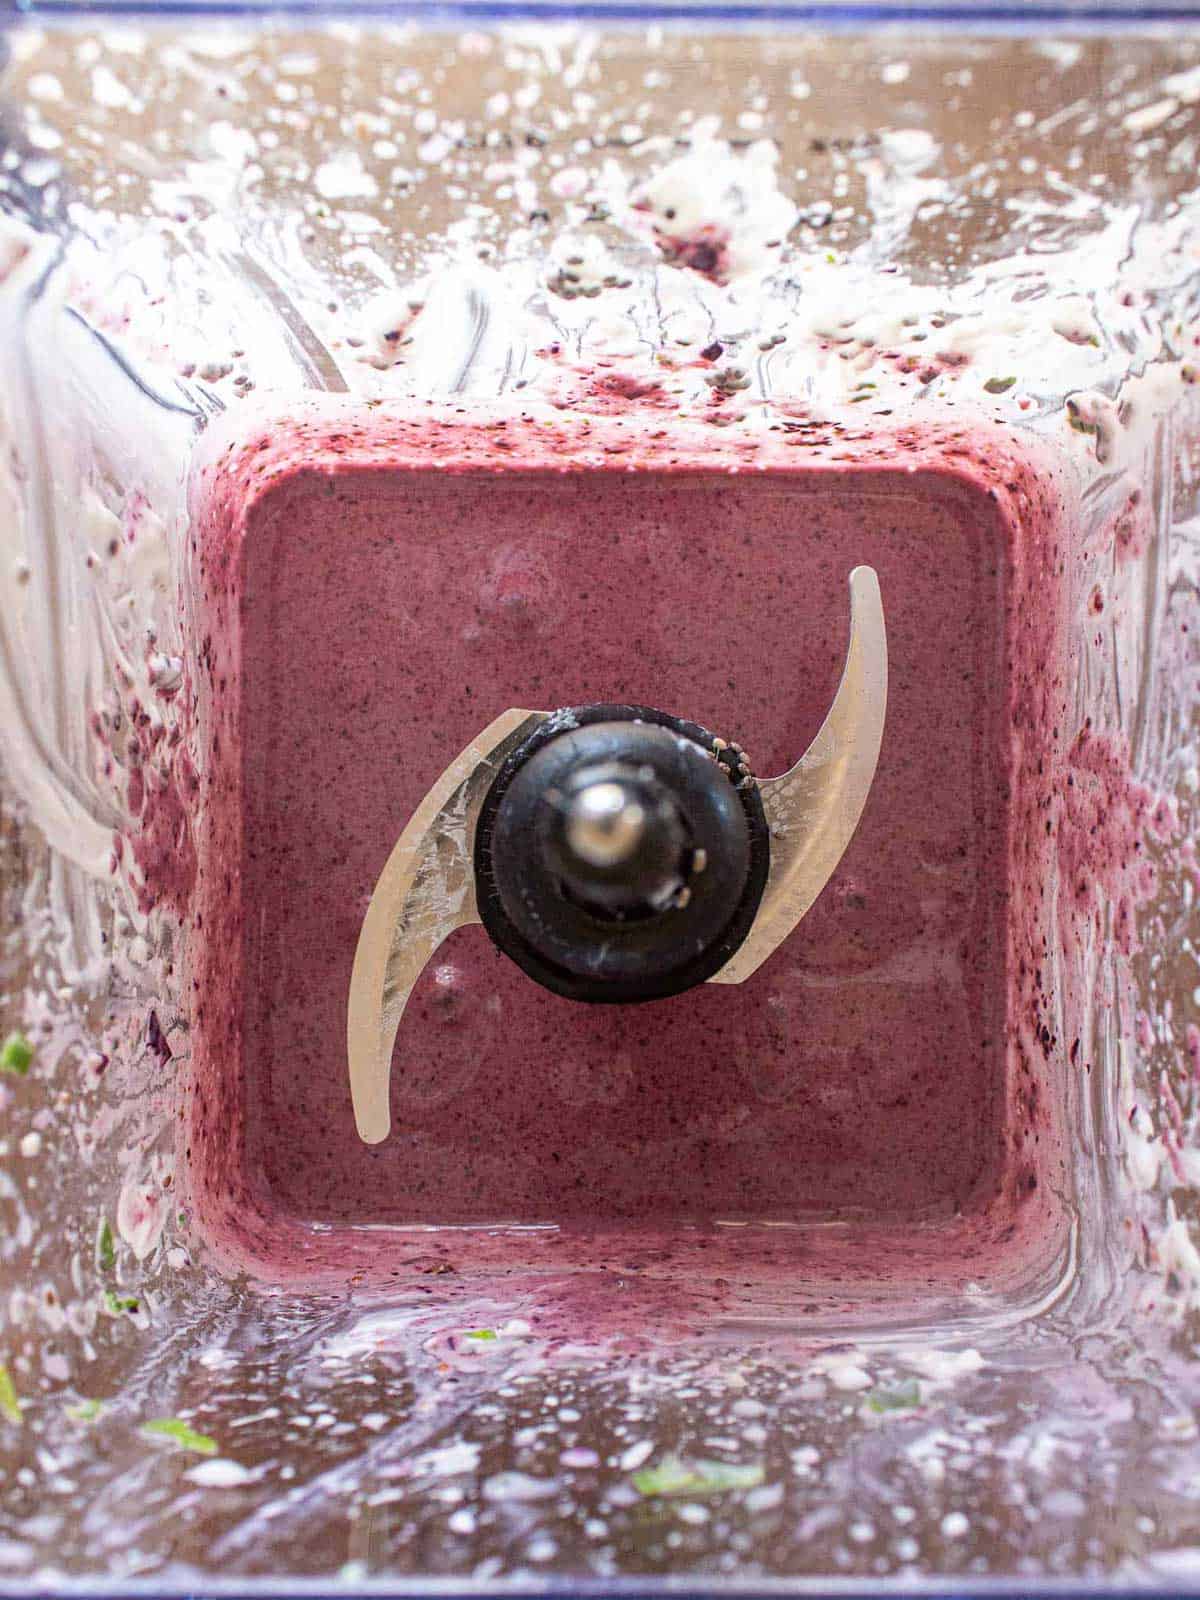 Top-down view inside a blender with blended blueberry banana spinach smoothie inside.